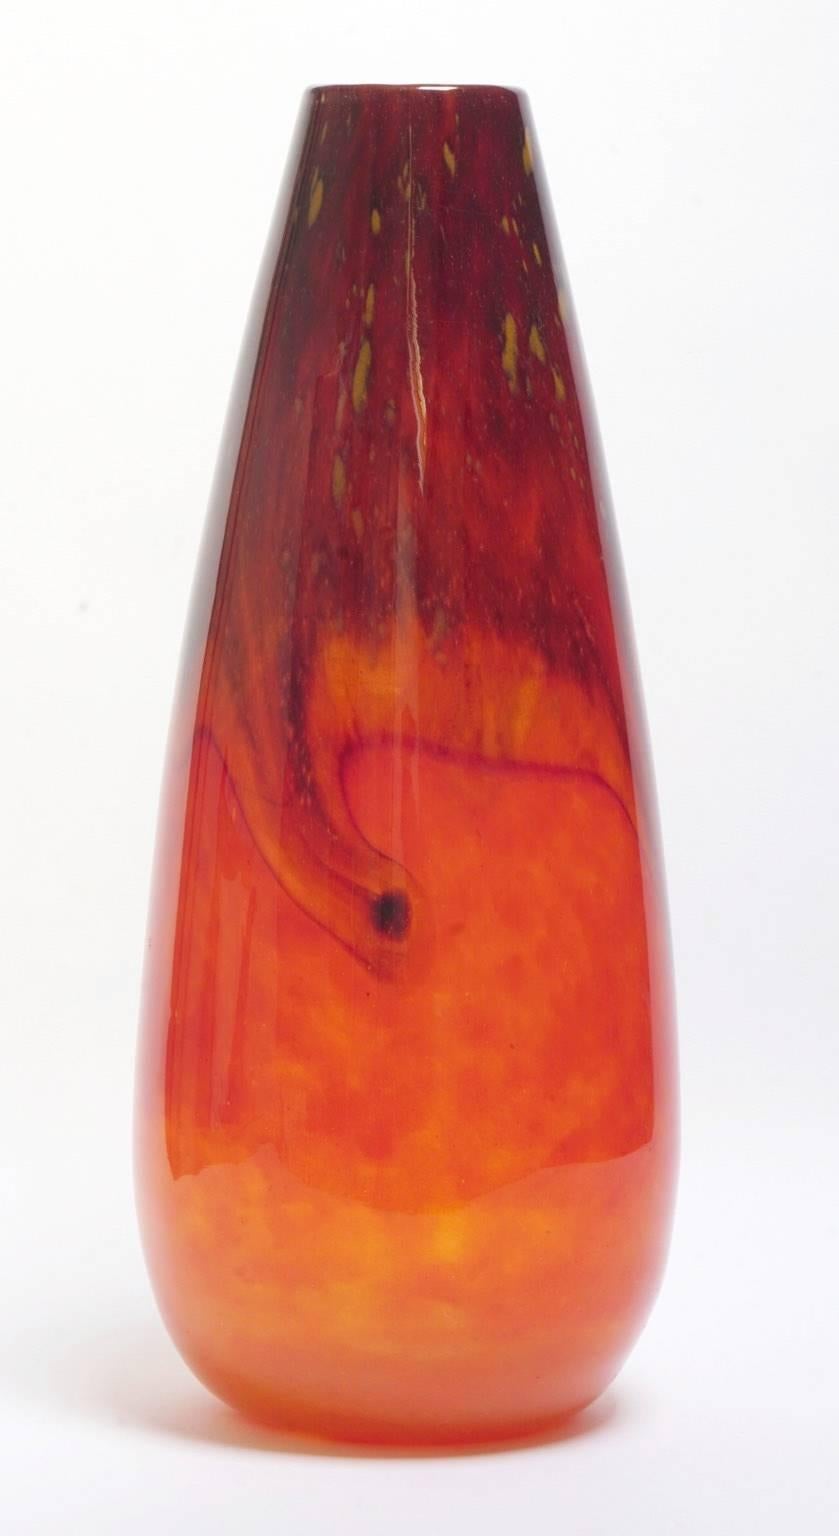 This large Art Deco vase is in Charles Schneider's signature orange tango color.

The marble series are very similar to the jade series. Sometimes it is difficult to distinguish between them.

From 1919 on, Charles Schneider kept strictly separated